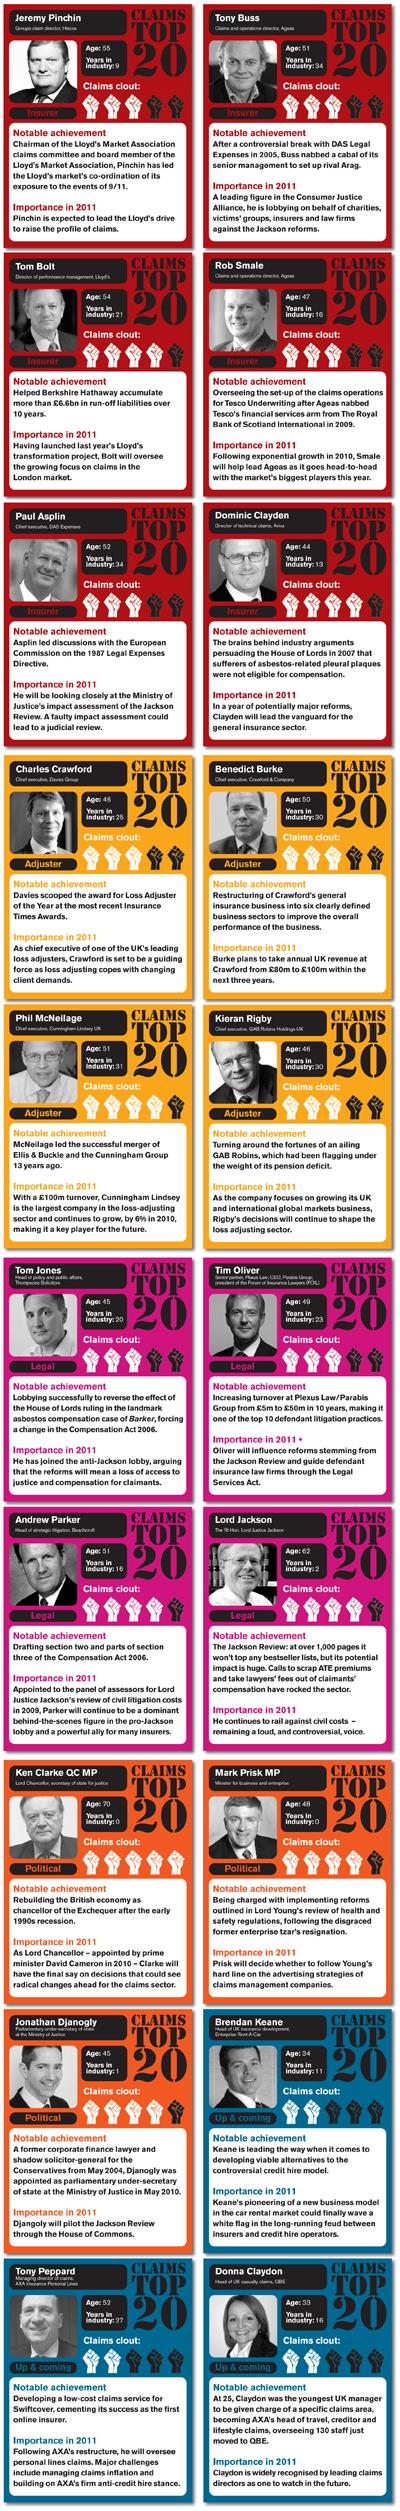 Insurance Times's top 20 personalities in claims